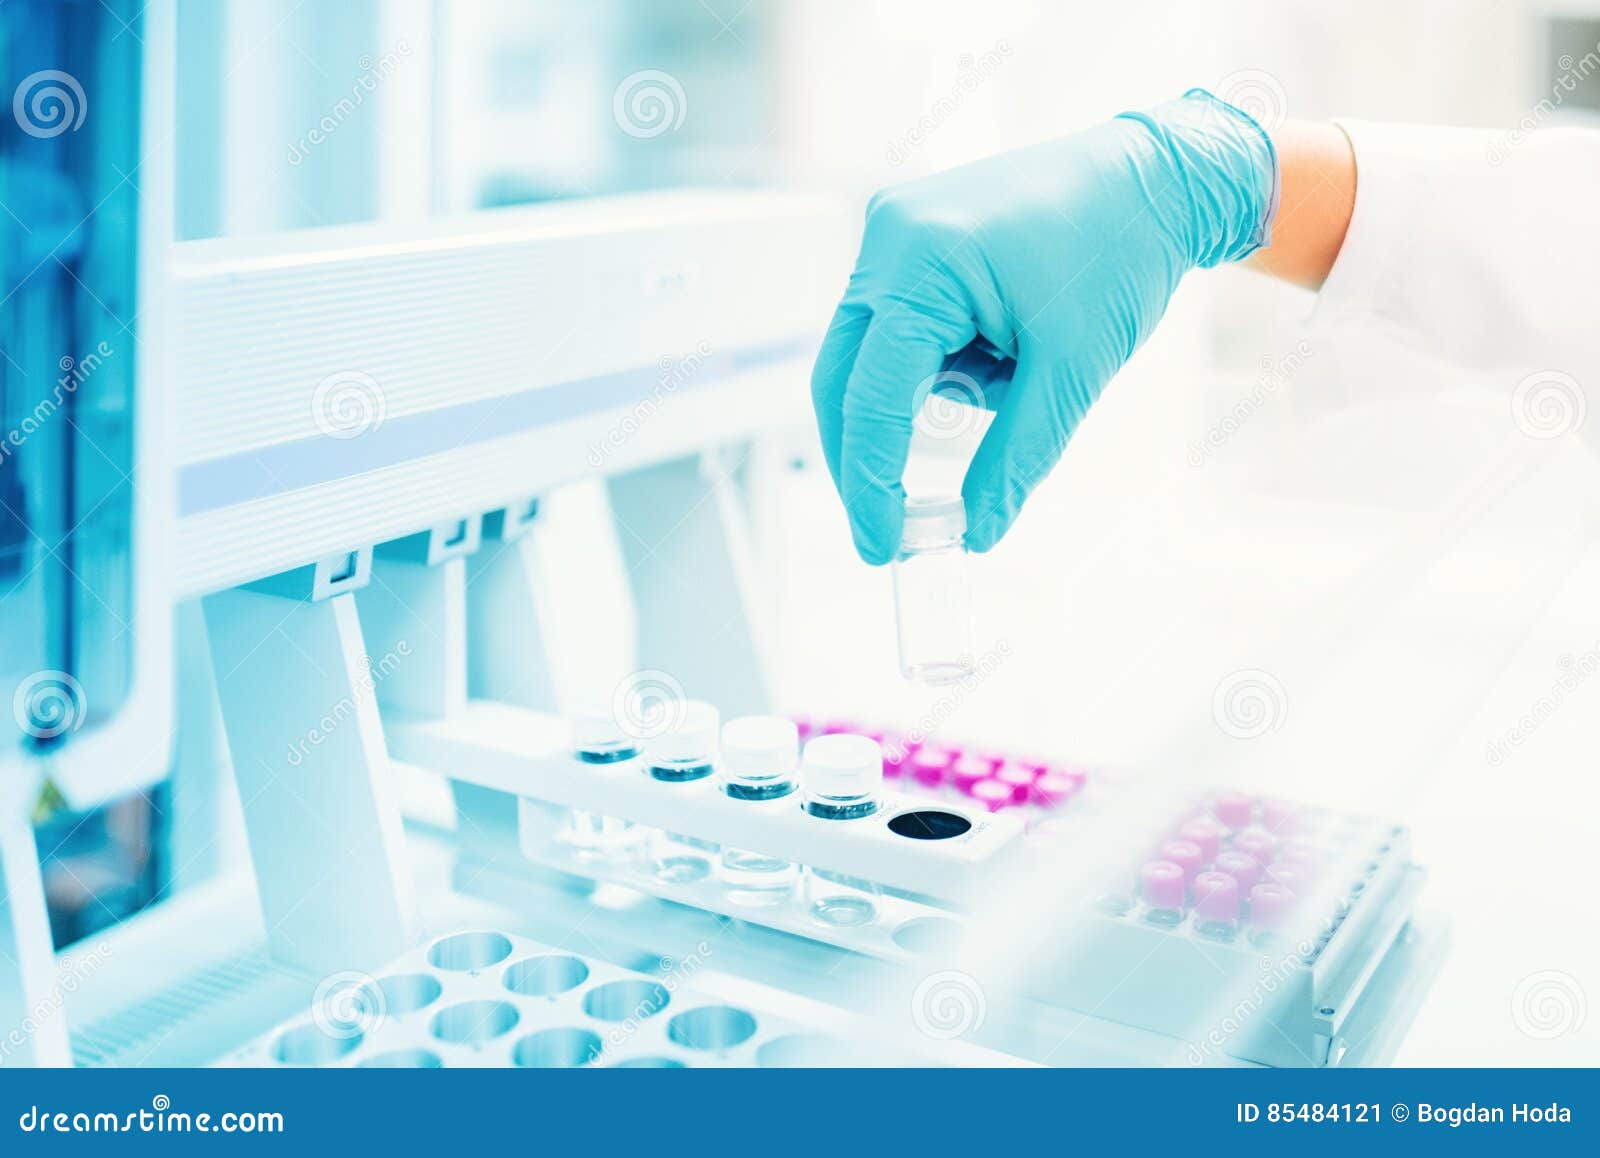 medical, pharmaceutical specialist hand holding empty sample for experiments